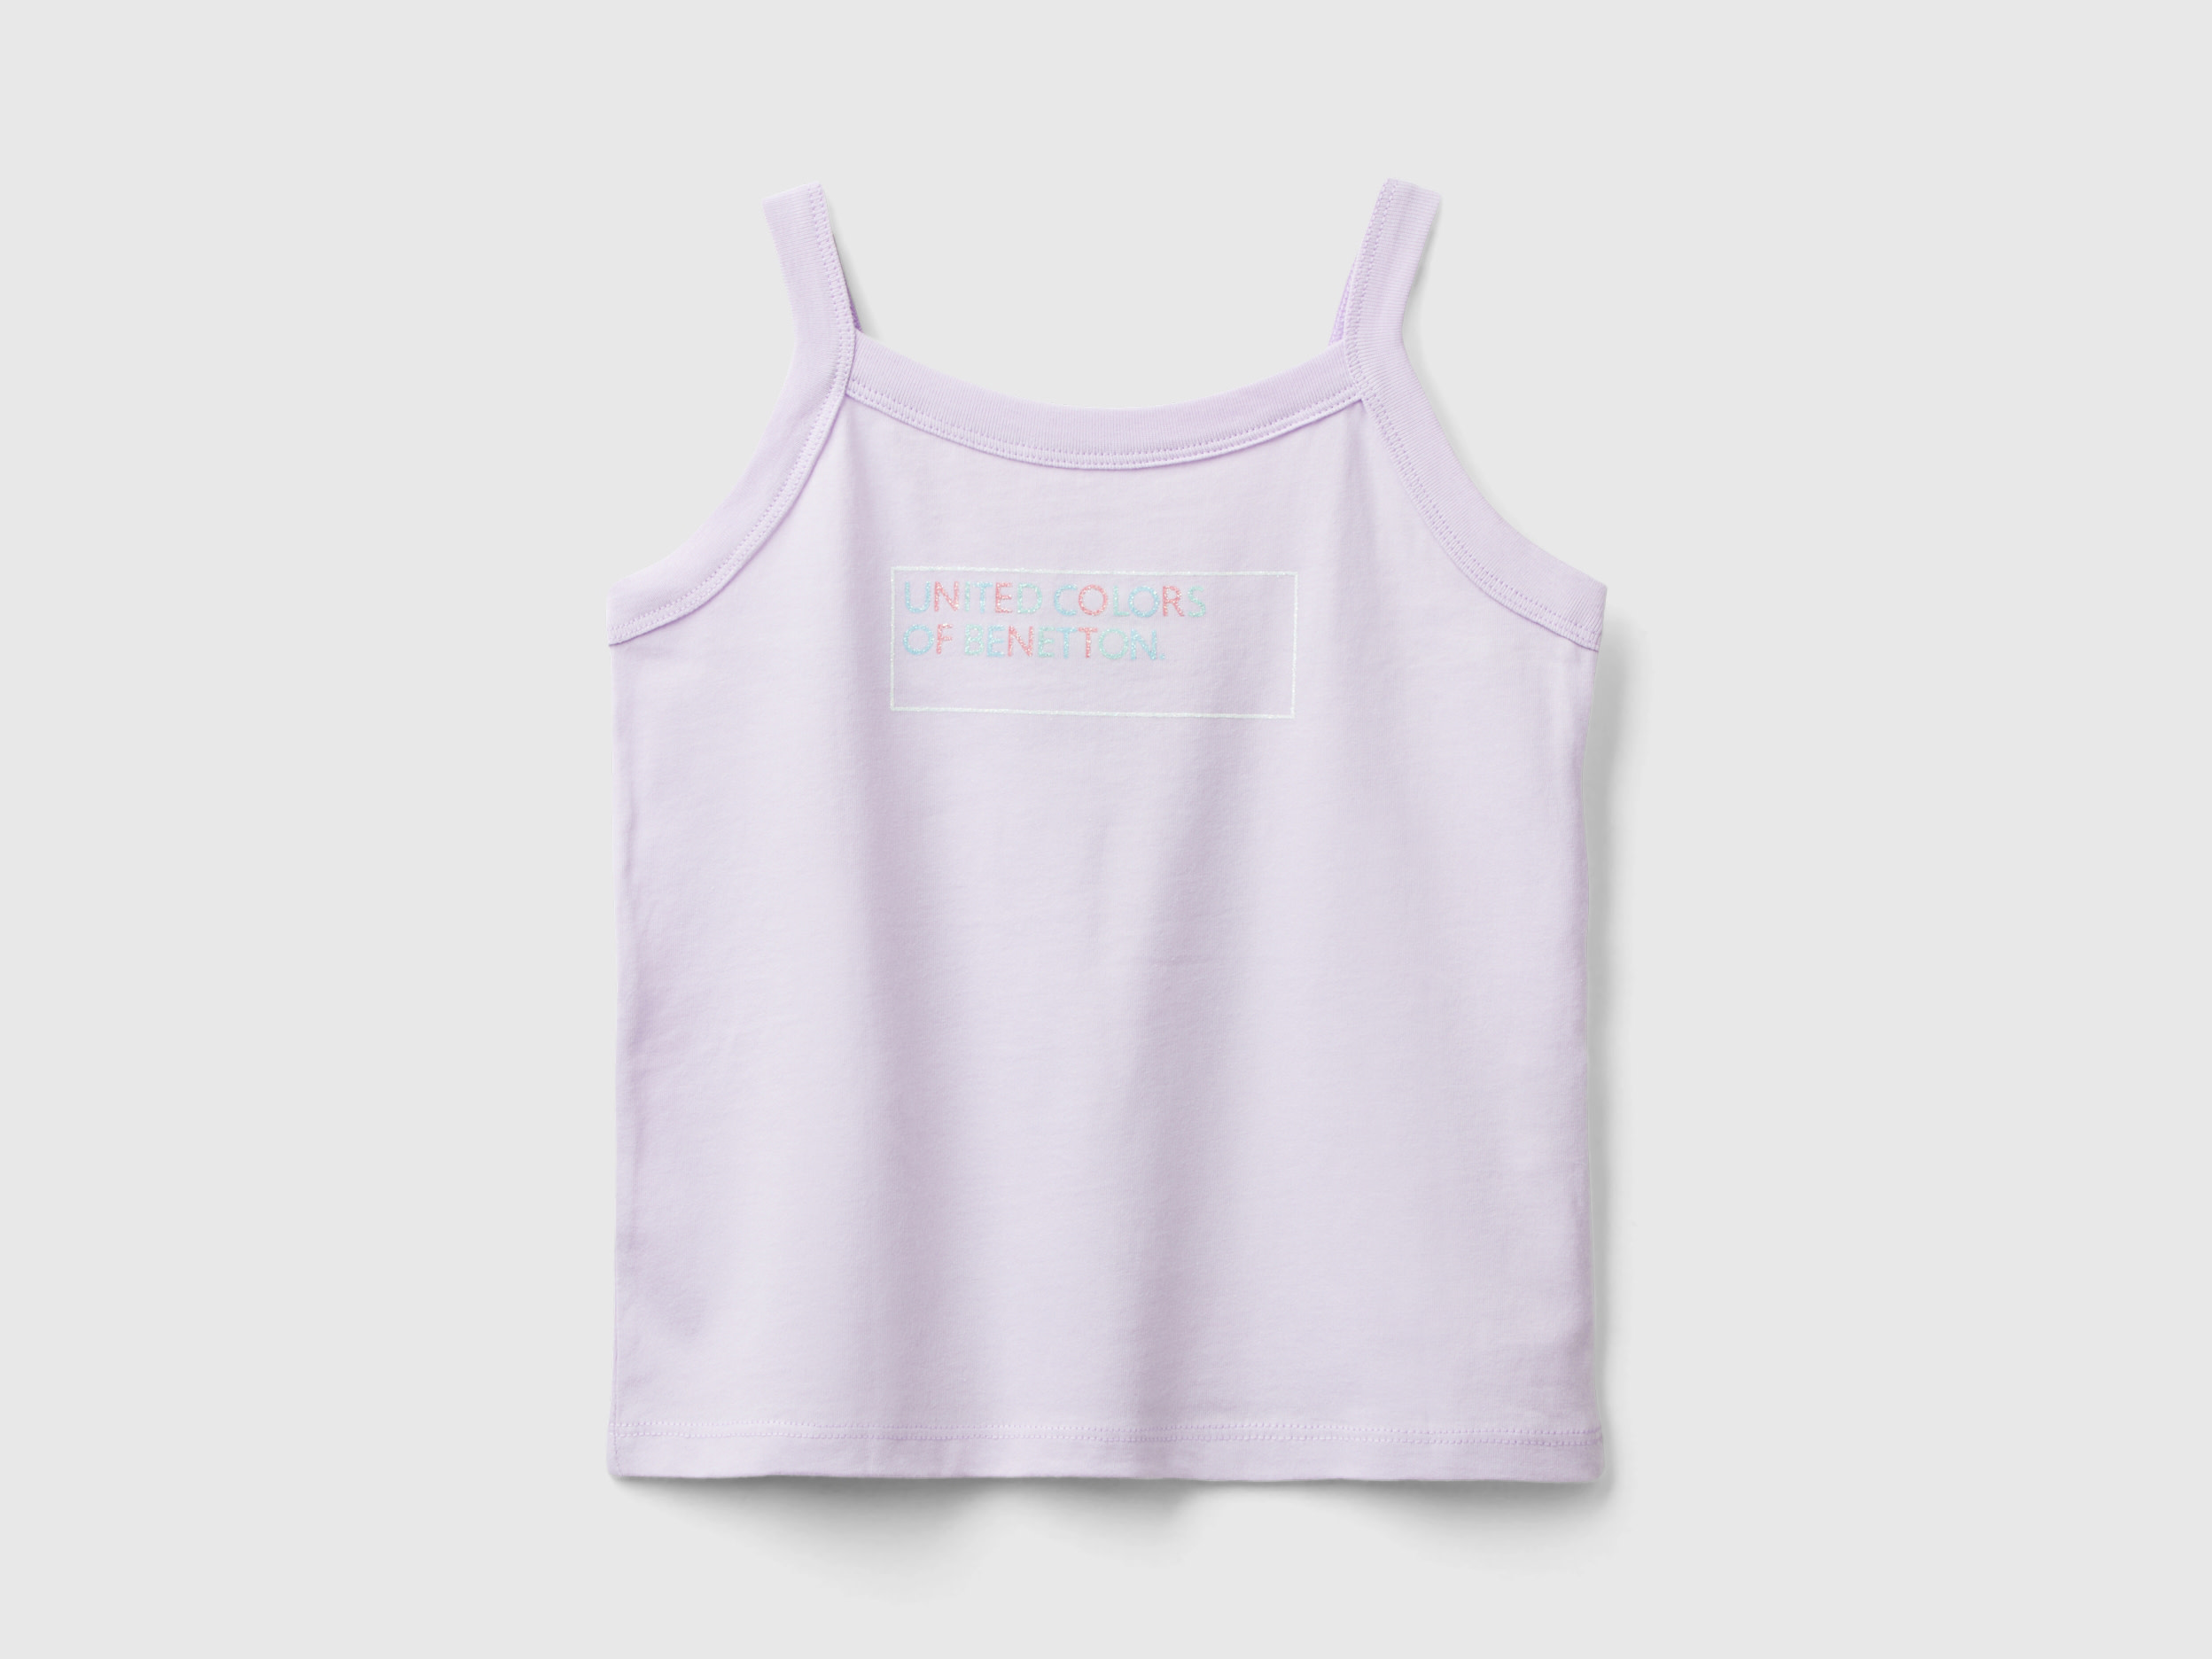 Image of Benetton, Tank Top With Glittery Logo Print, size S, Lilac, Kids